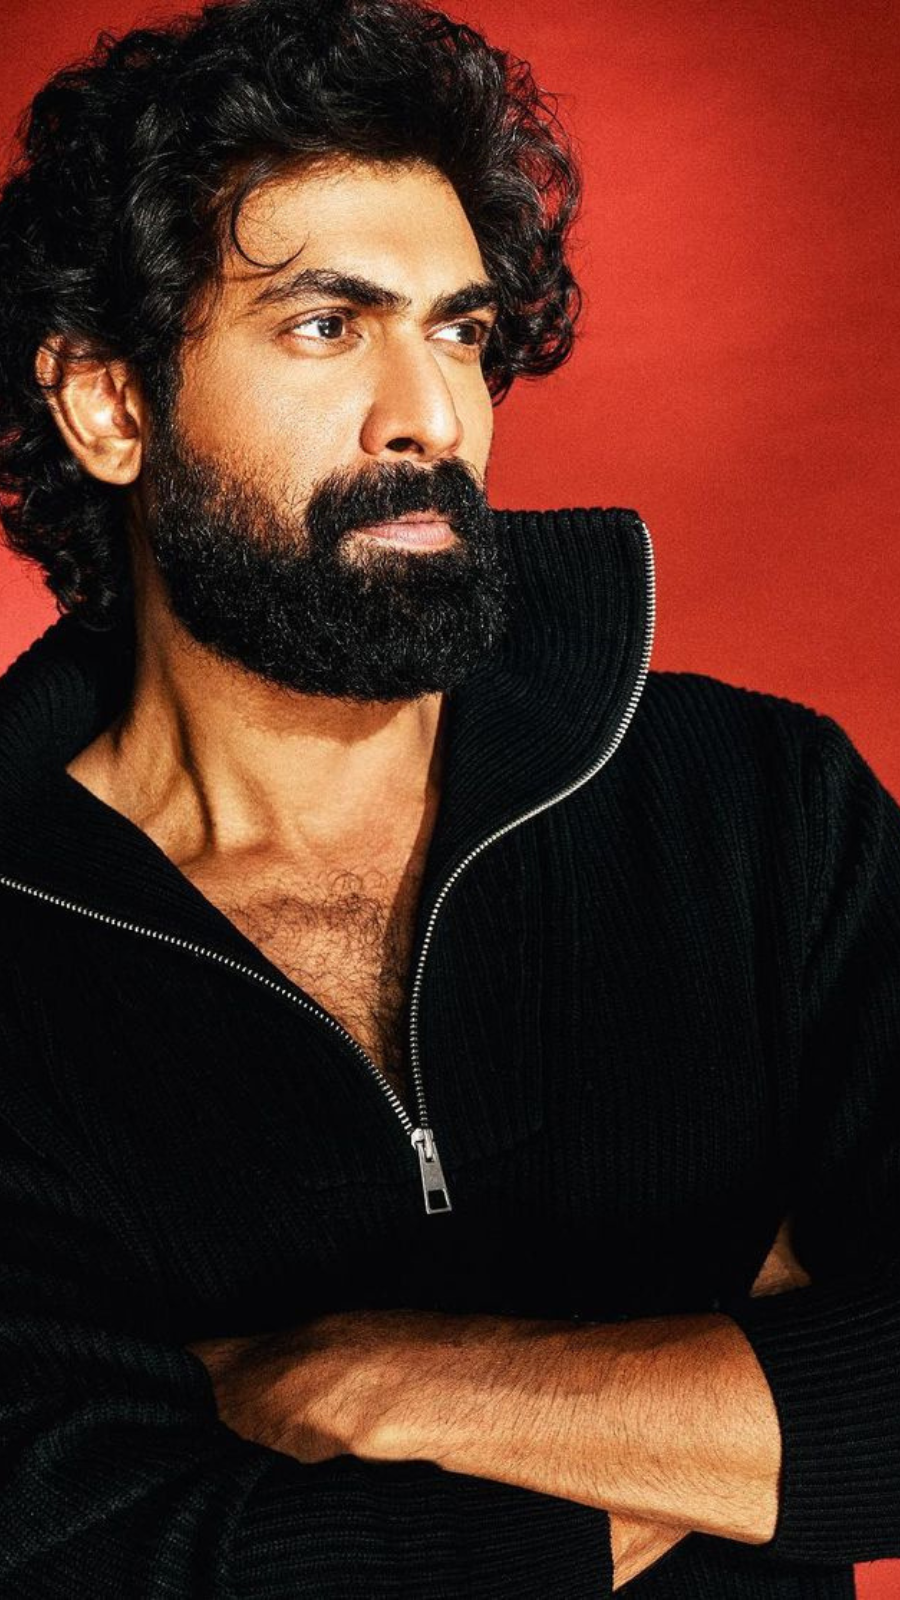 Rana Daggubati B'day: From 'Baahubali' To 'Baby', Roles That Proved His  Mettle As An Actor